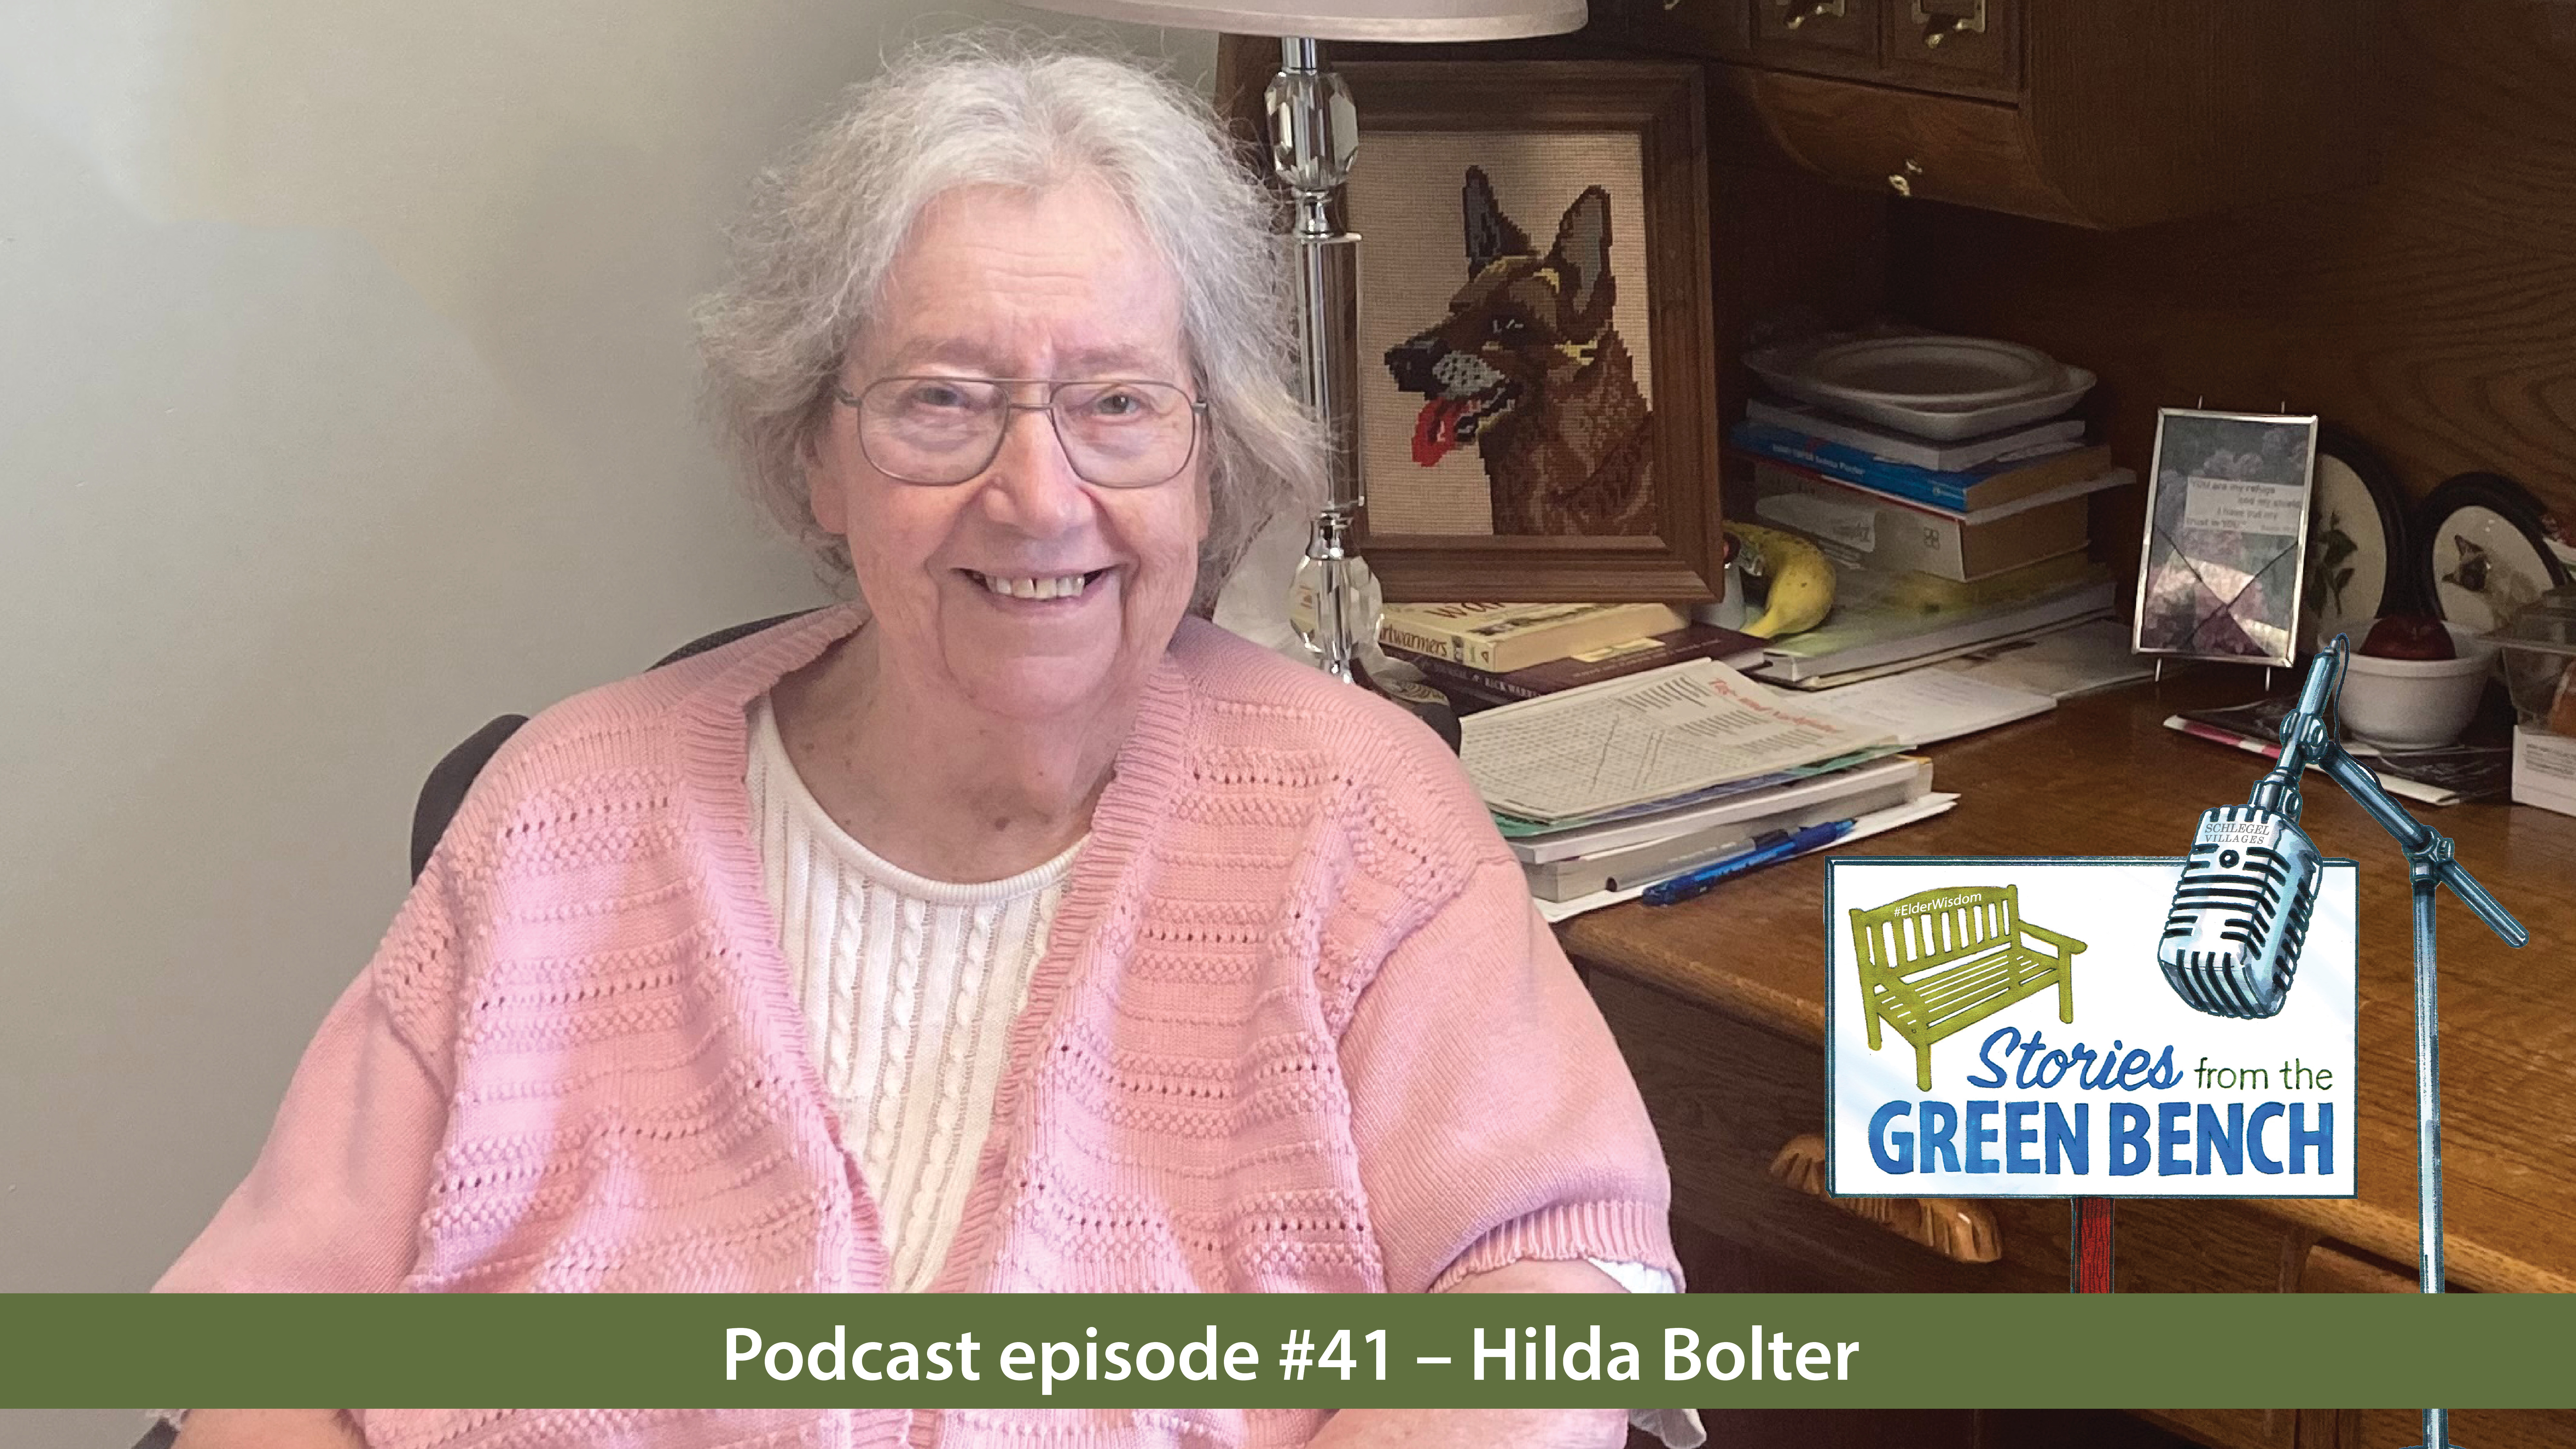 Hilda Bolter shares her story from the green bench on the #ElderWisdom podcast